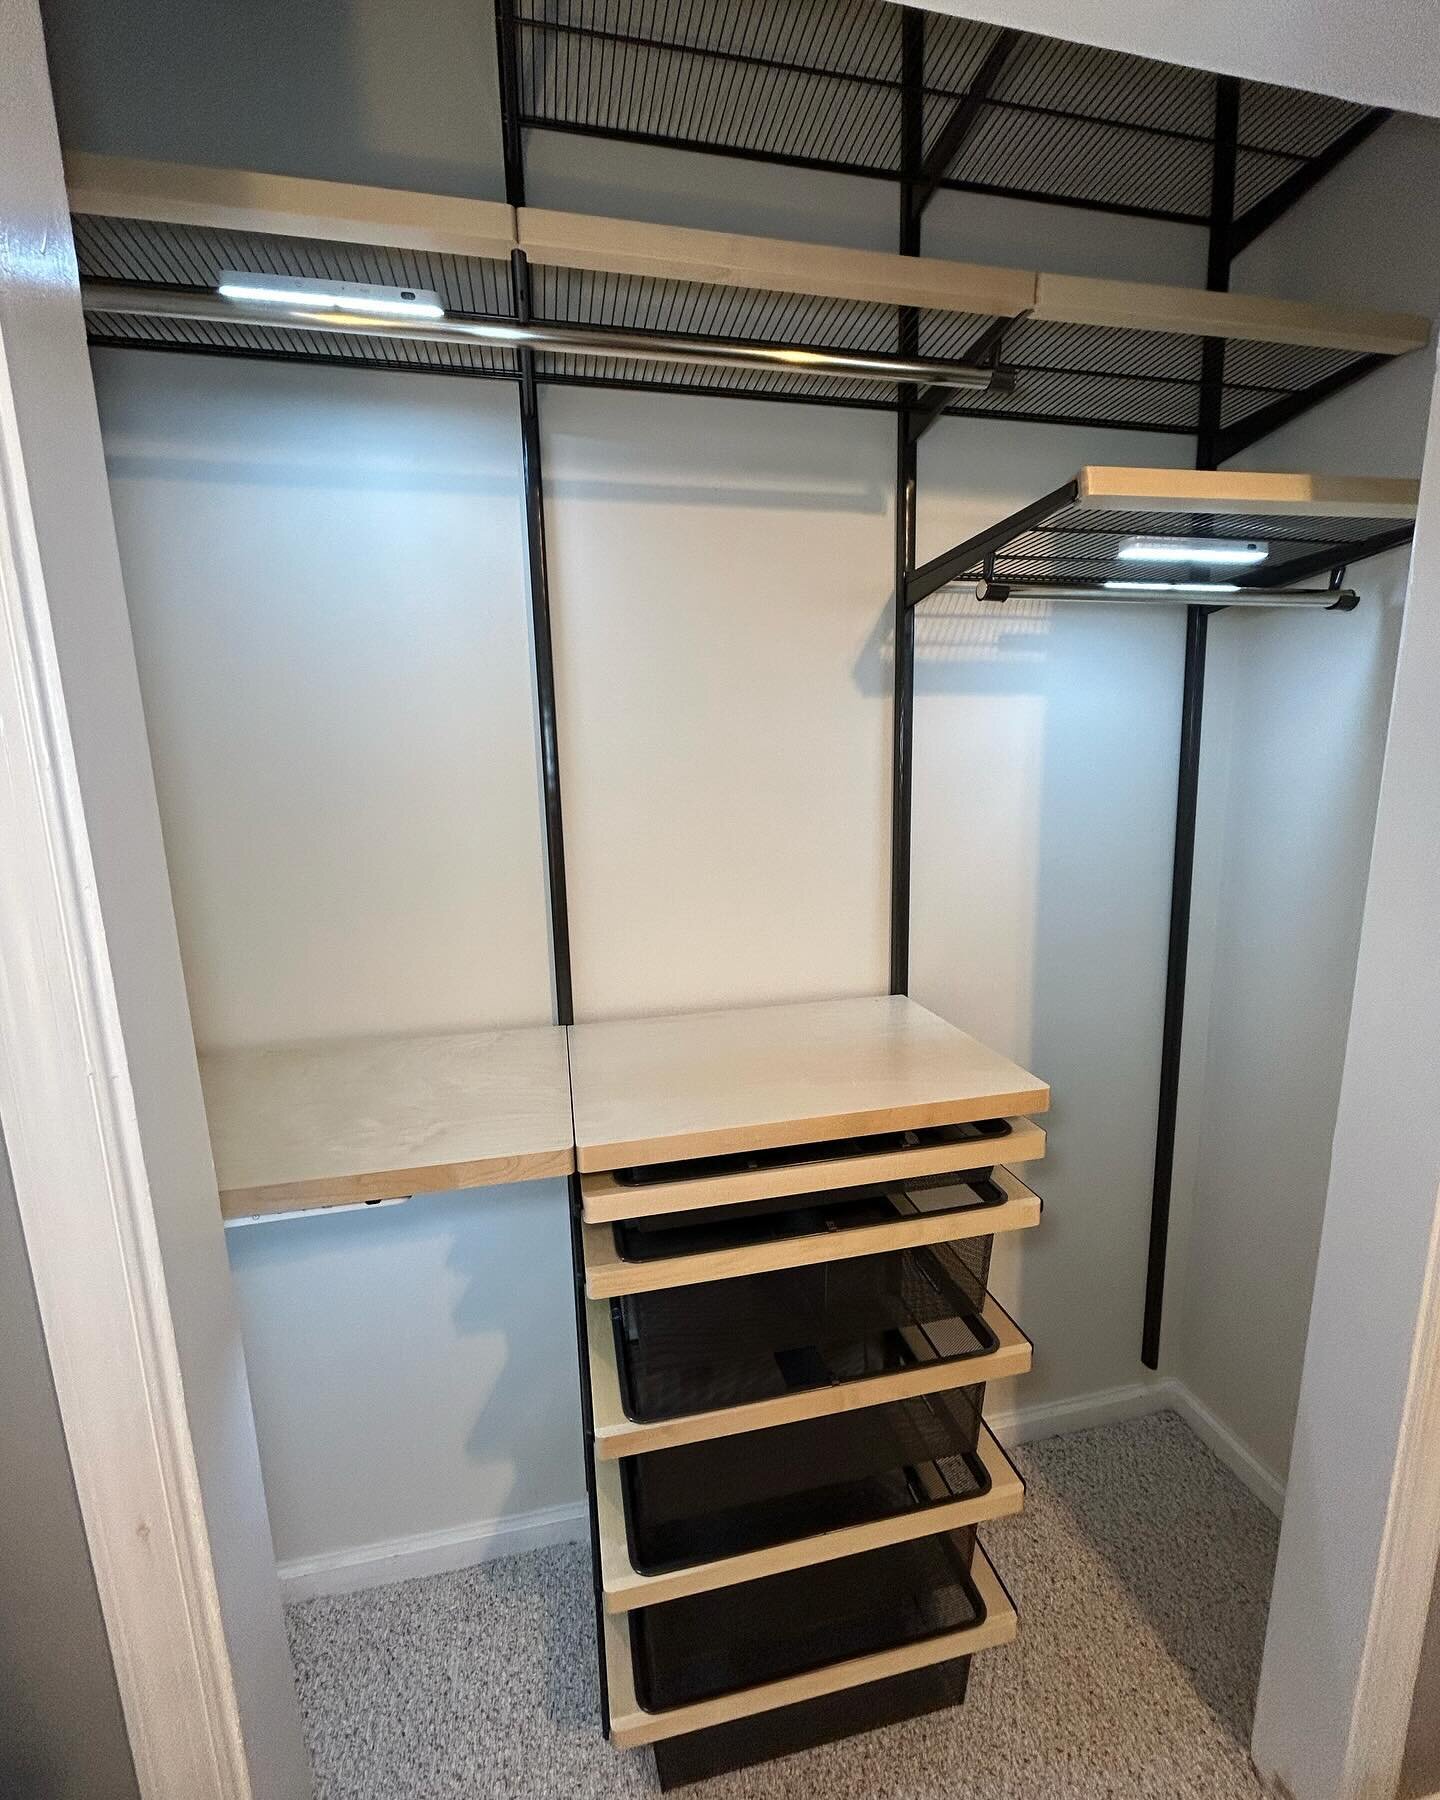 The closet kick continues&hellip;

From☝🏽 shelf and☝🏽 rod to this @thecontainerstore Elfa closet. Complete with hanging sections, draws, shelves, and additional &ldquo;hidden&rdquo; storage for bedding or off season clothes out of sight. My favorit